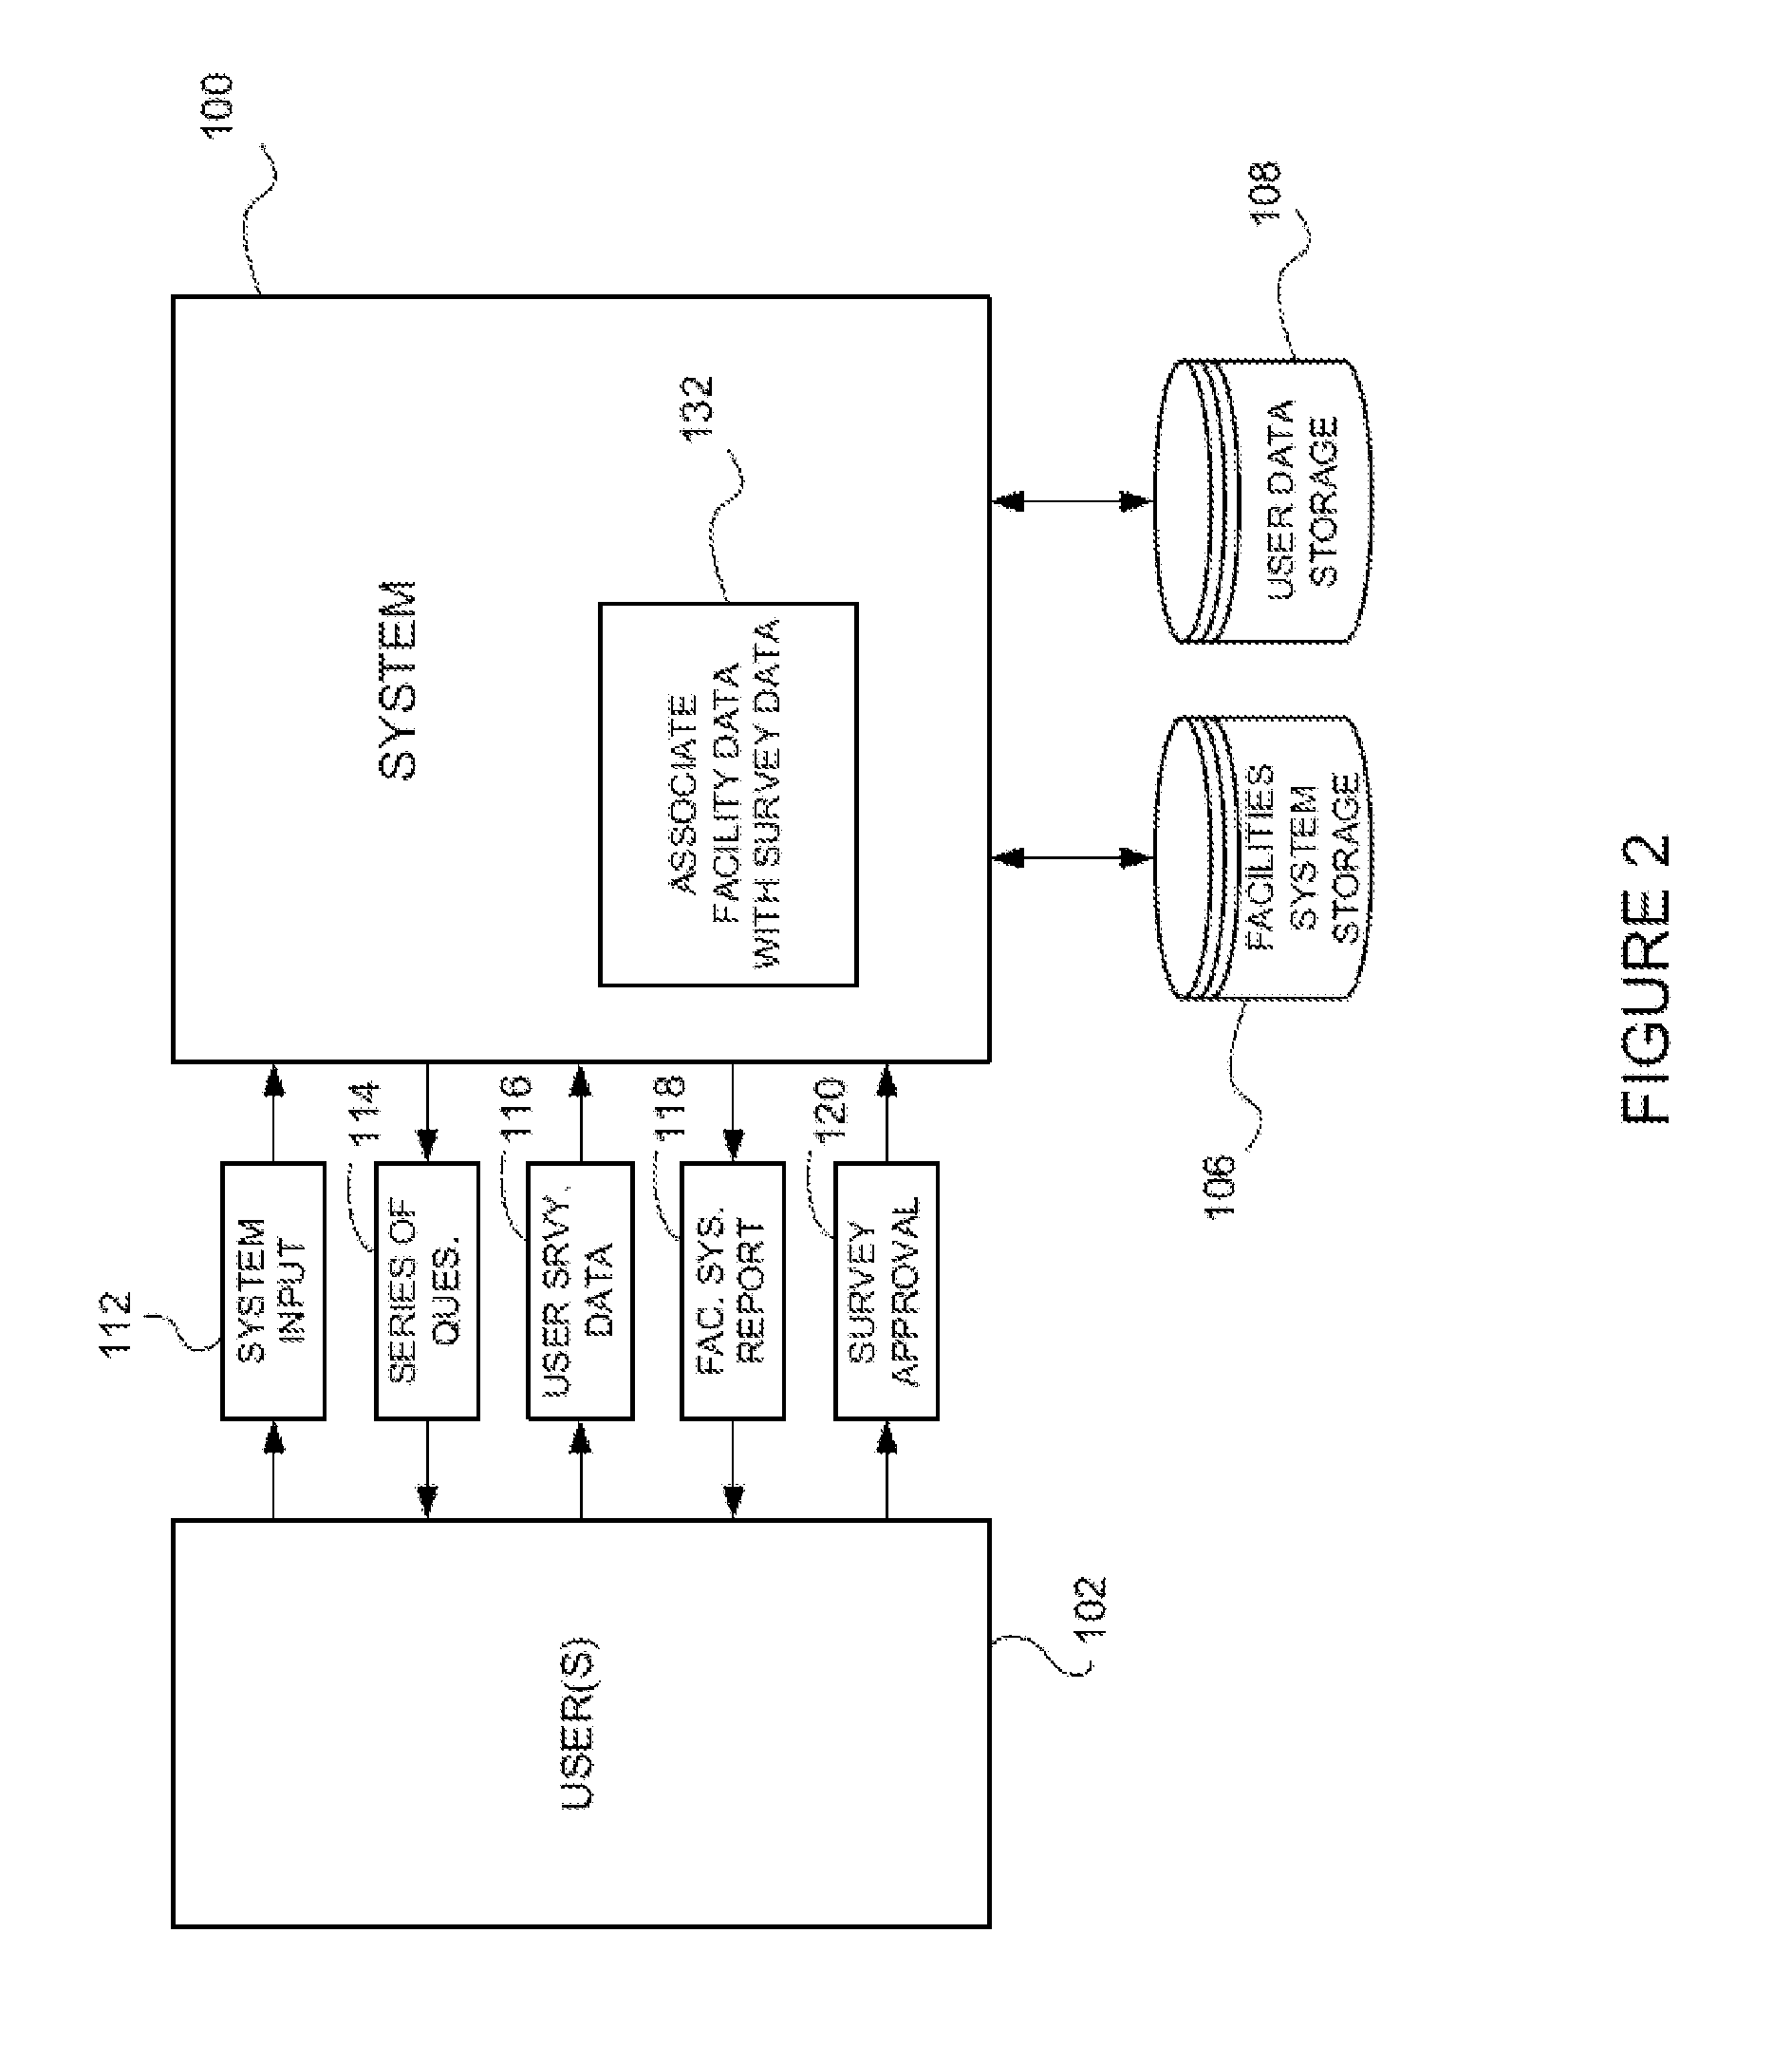 System and Method for Managing Facilities